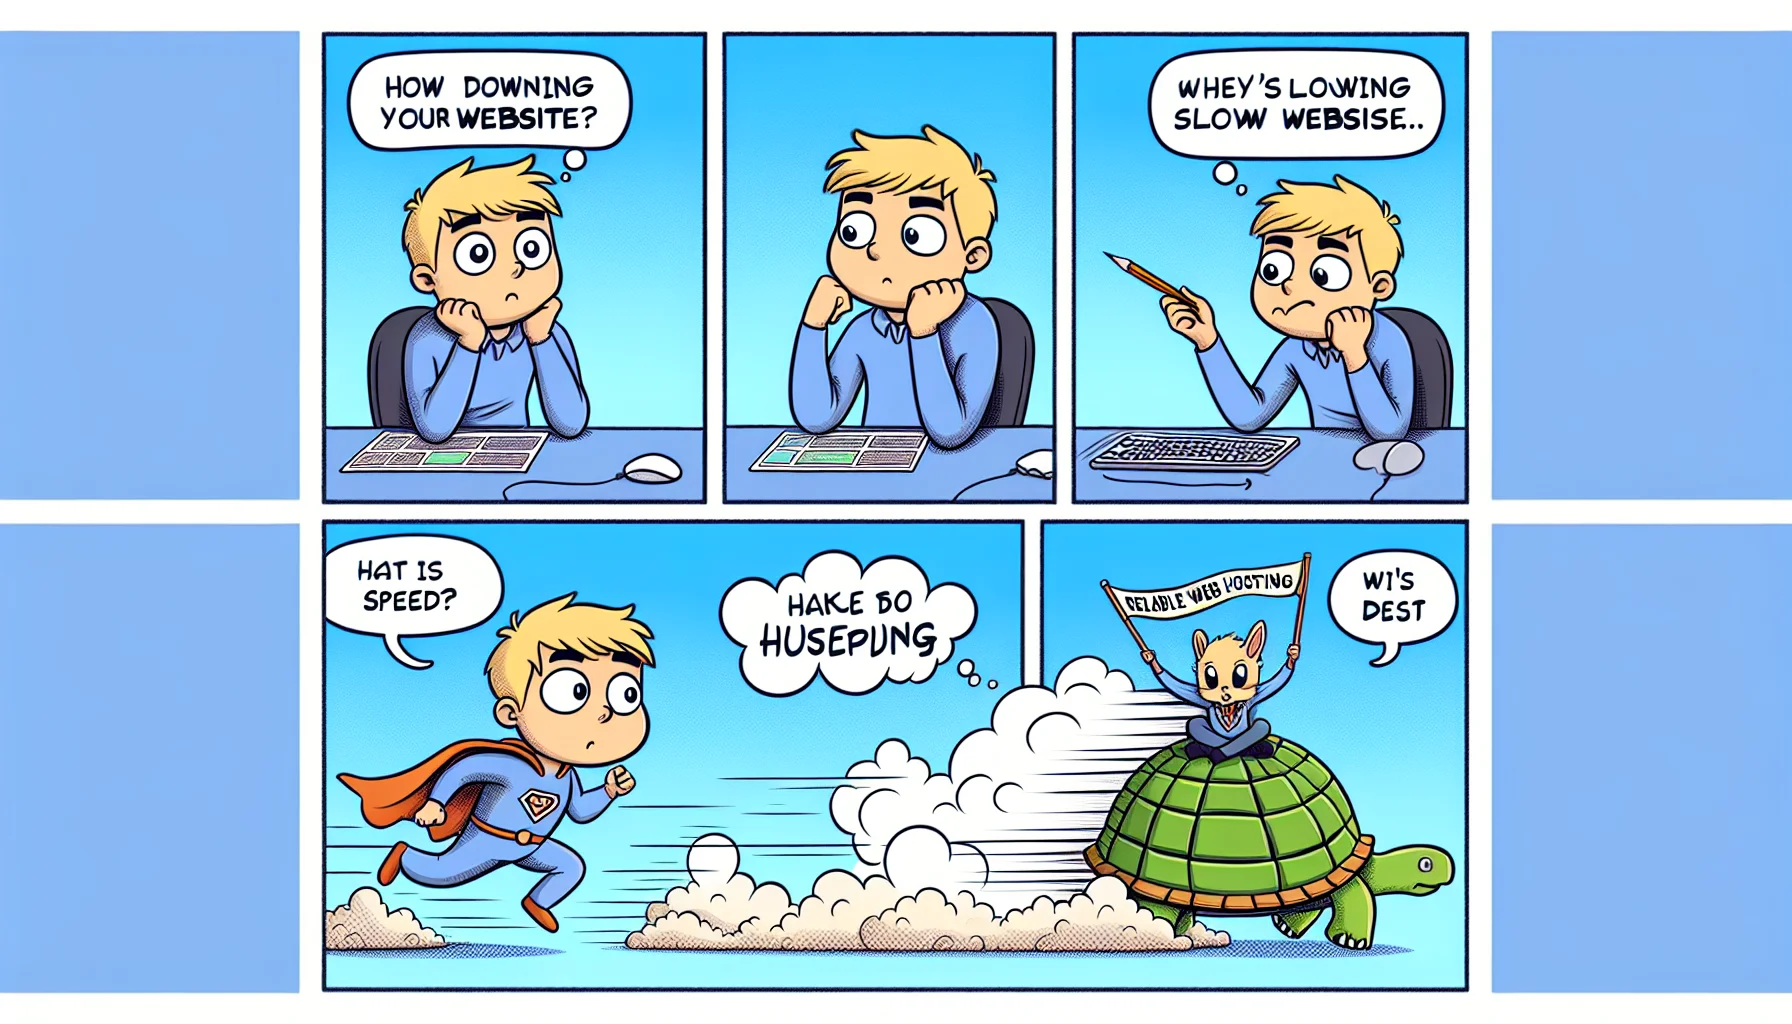 Create an image of a comic strip that humorously illustrates the concept of web hosting. The first panel shows a perplexed character pondering their slowing website, represented as a tortoise with a web pattern on its shell. In the next panel, a friend recommends a solution, drawn as a superhero labeled 'Reliable Web Hosting', flying in to save the day. In the final panel, the initial character's website, now shown as a rabbit with the same web pattern, races ahead, leaving dust clouds. This effectively represents the improvement in speed after obtaining reliable web hosting services.